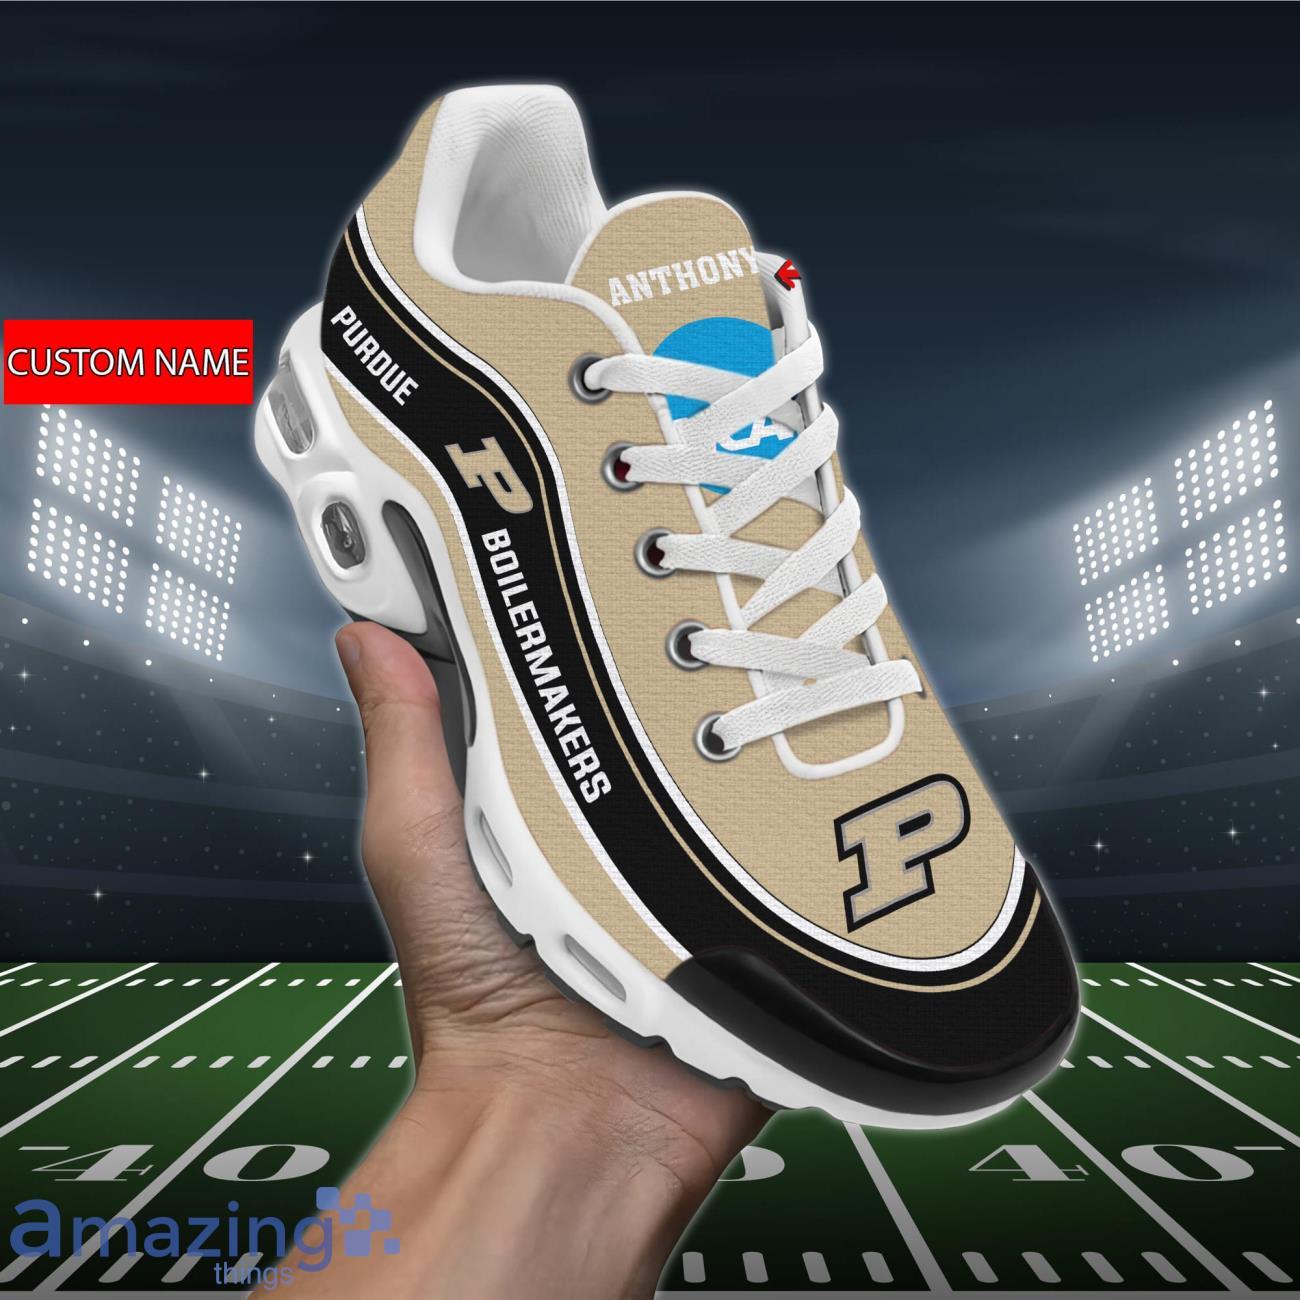 Purdue Boilermakers NCAA Air Cushion Sports Shoes Custom Name For Fans Product Photo 1